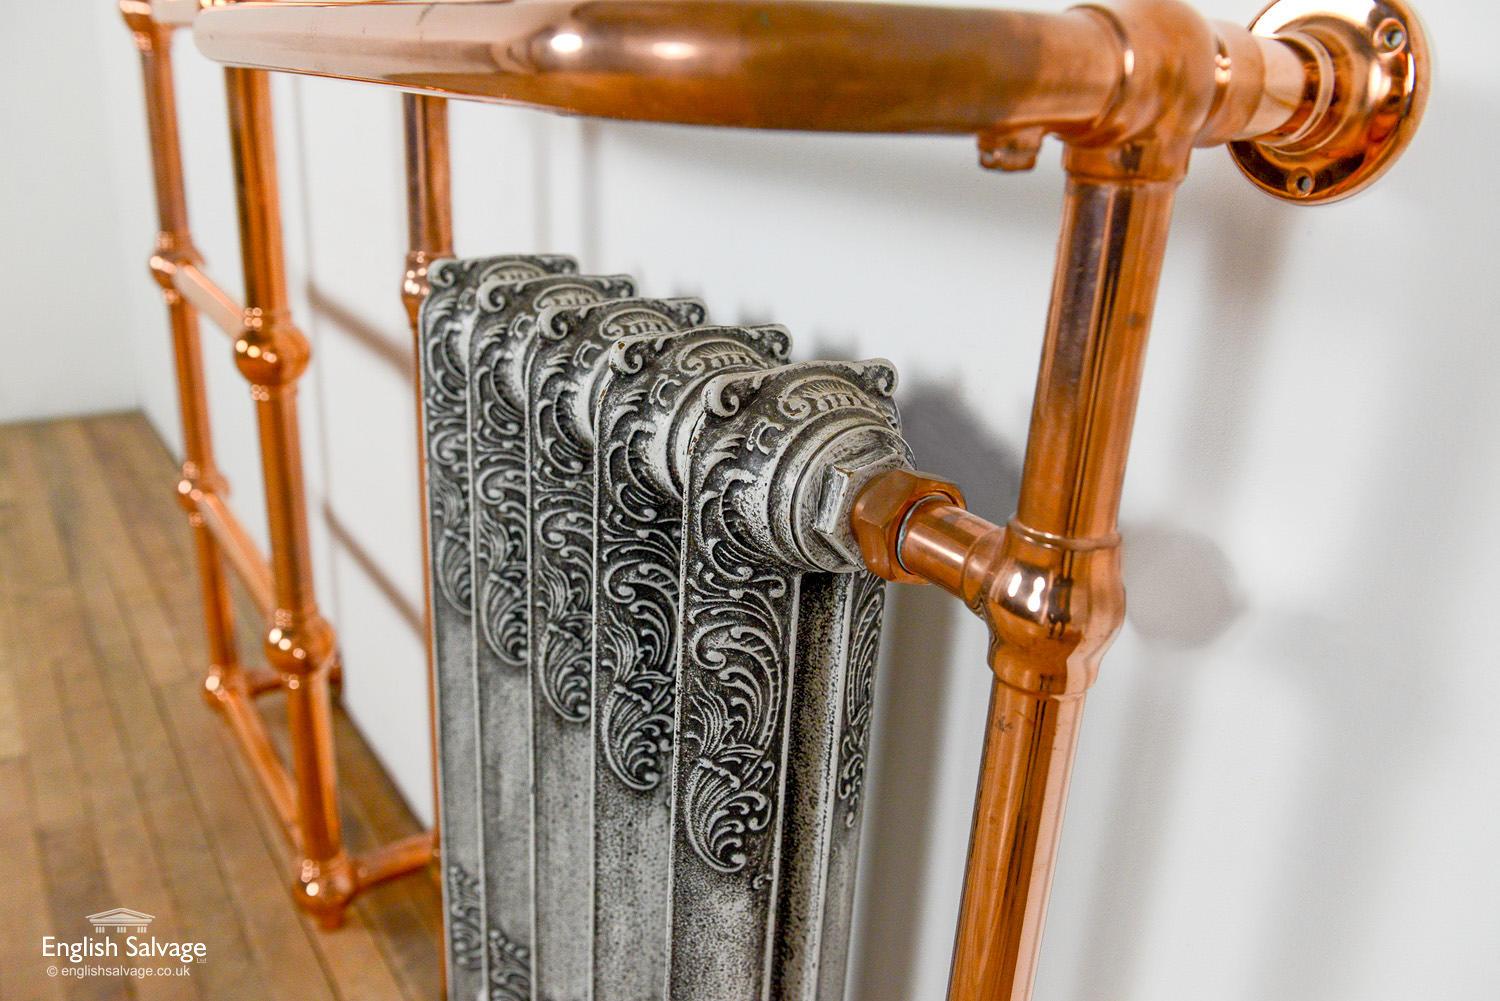 Copper-Plated Radiator and Towel Rail, 20th Century In Good Condition For Sale In London, GB